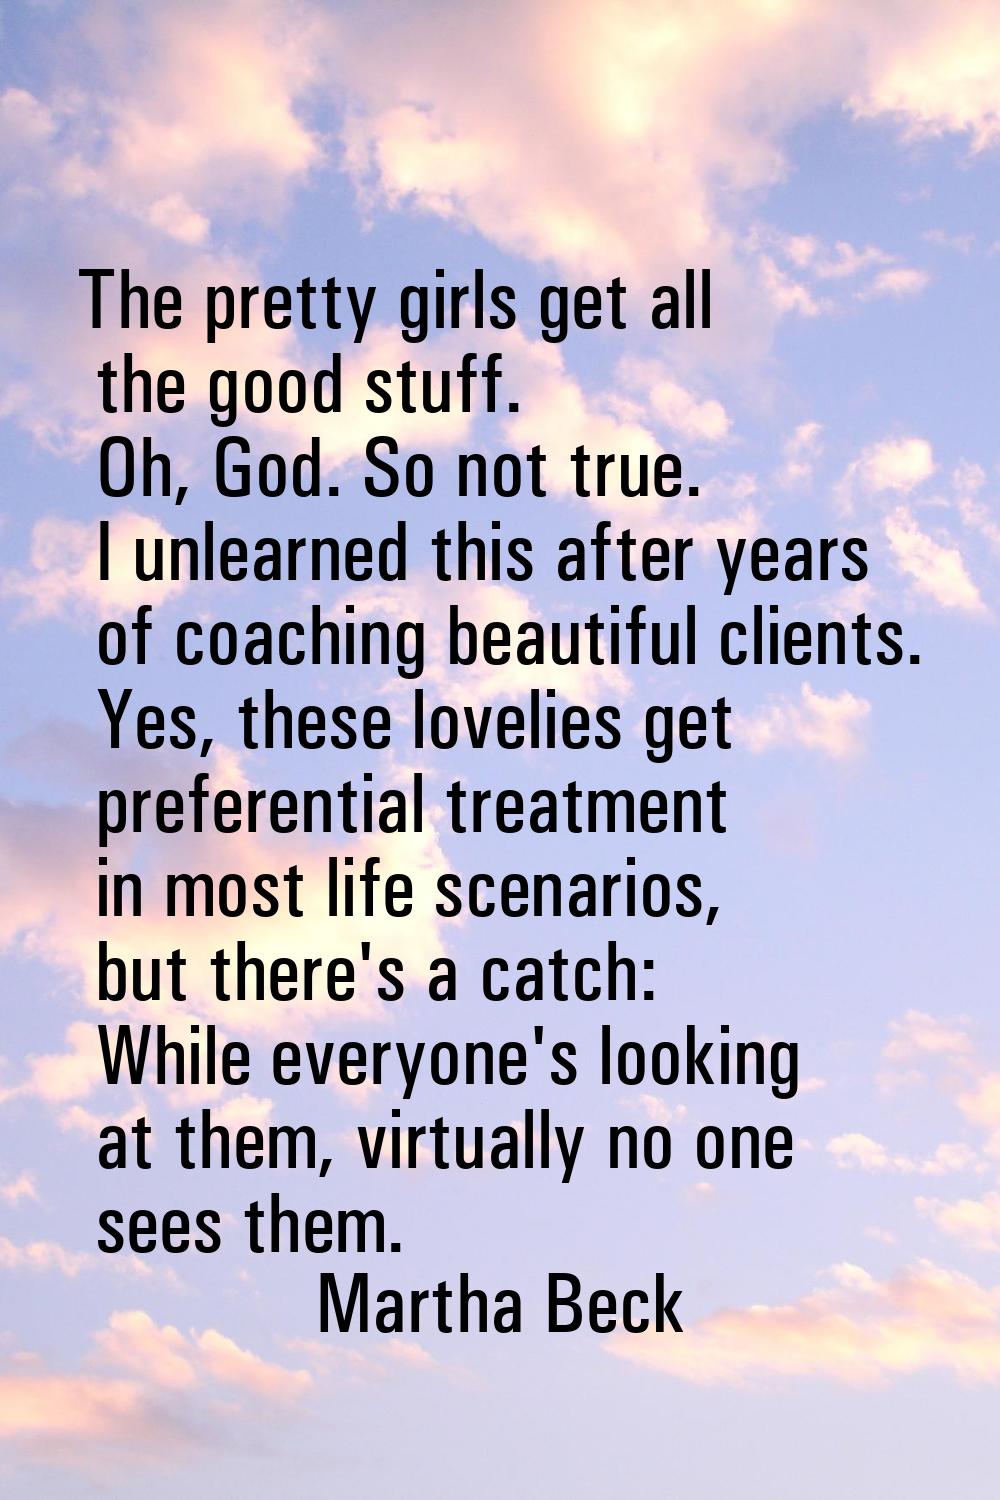 The pretty girls get all the good stuff. Oh, God. So not true. I unlearned this after years of coac